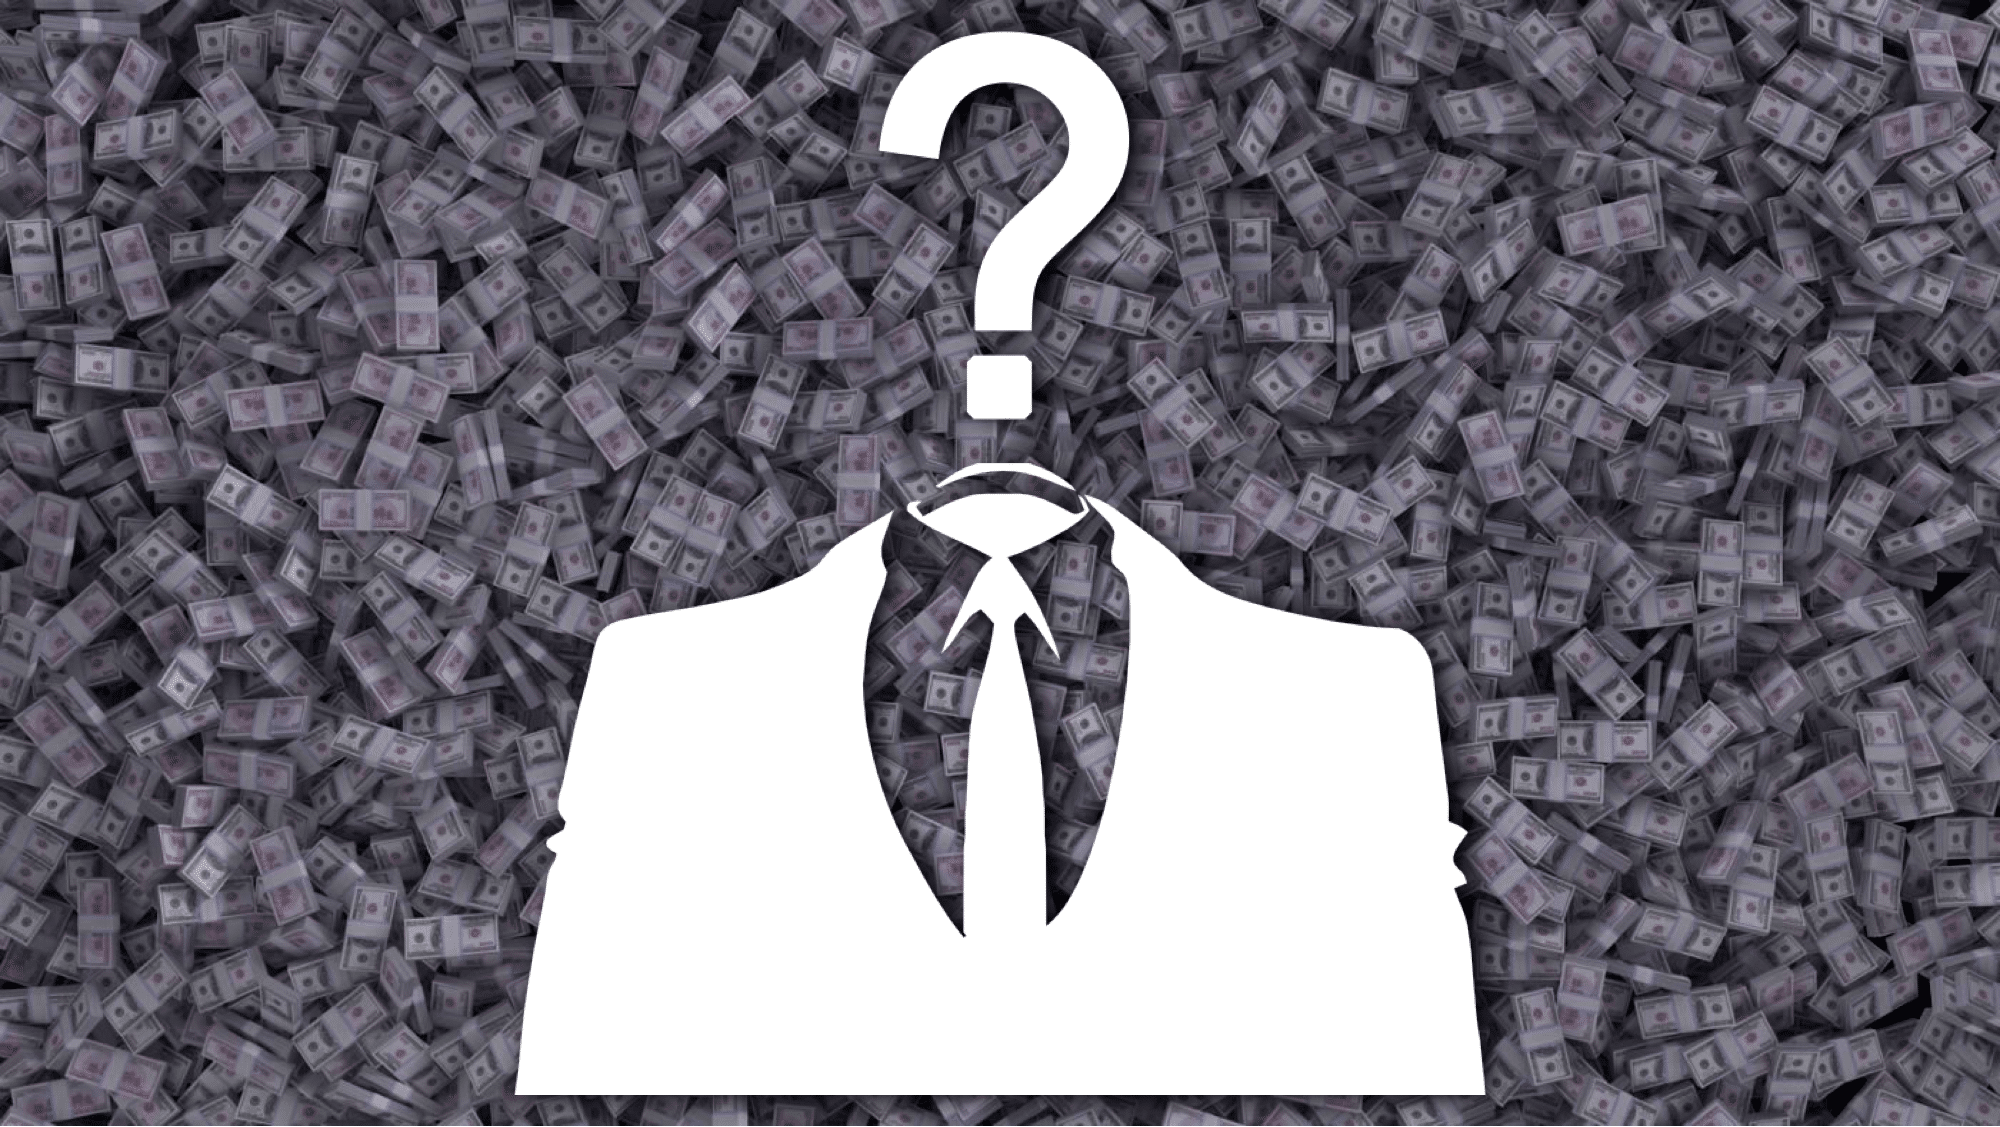 Bitcoin's Volatility: Who is Satoshi. Image shows a suit and tie figure with a question mark for a head.